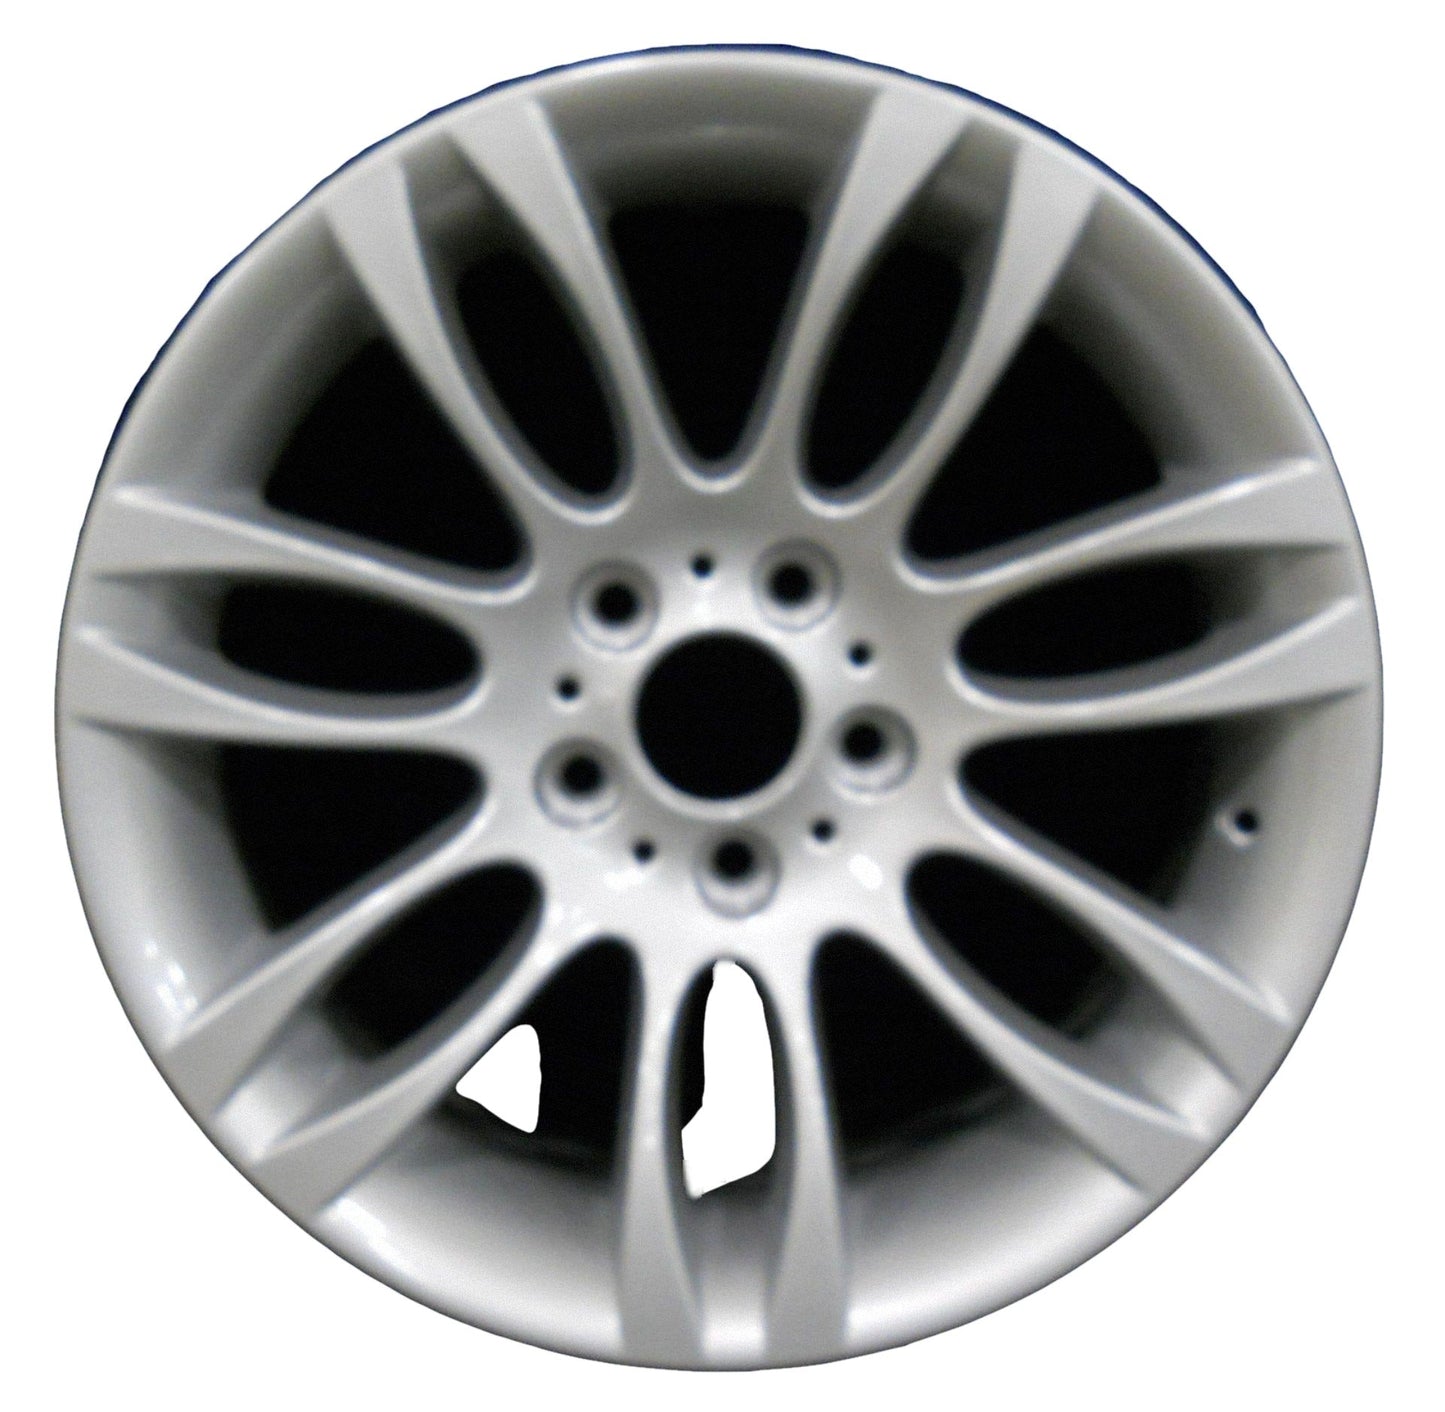 BMW 328i  2007, 2008, 2009, 2010, 2011, 2012, 2013 Factory OEM Car Wheel Size 18x8 Alloy WAO.59594FT.PS06.FF